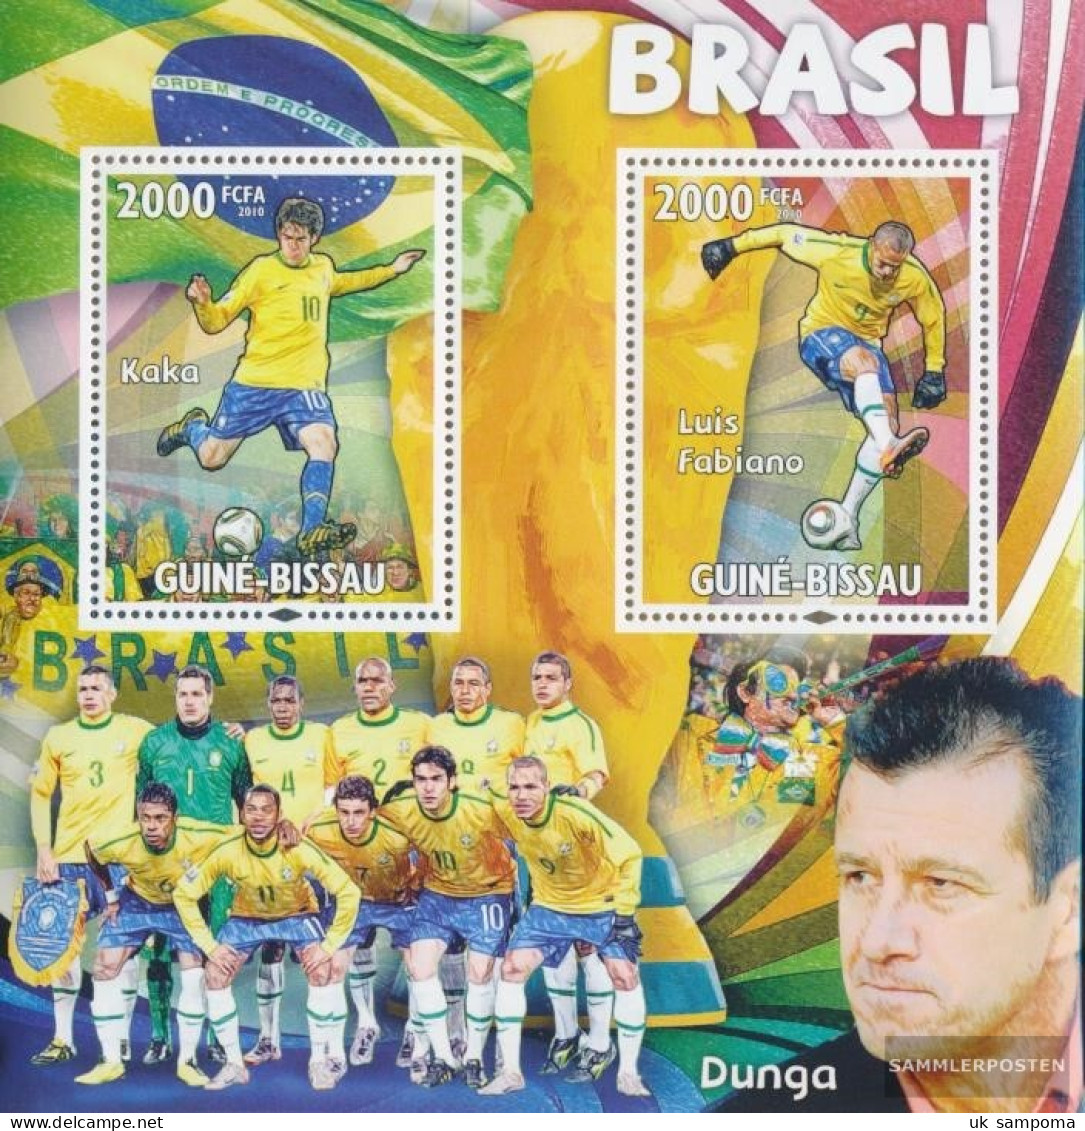 Guinea-Bissau Miniature Sheet 799 (complete. Issue) Unmounted Mint / Never Hinged 2010 Brazil, Kaka, Luis Fabiano, Ing - Guinea-Bissau